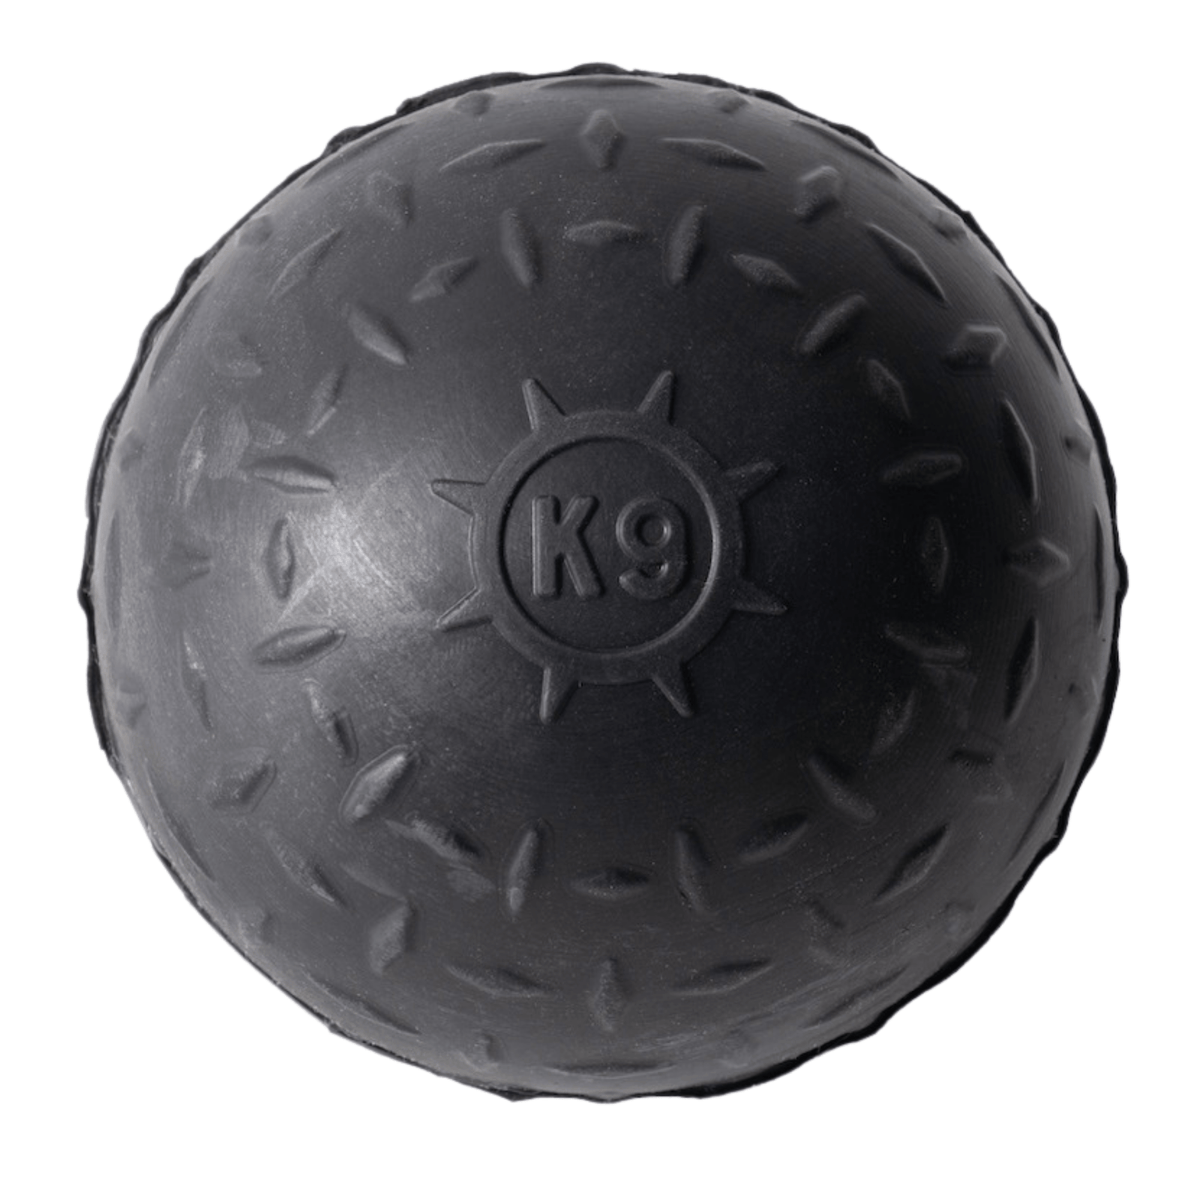 Ultra Durable Solid Ball - Monster K9 Dog Toys